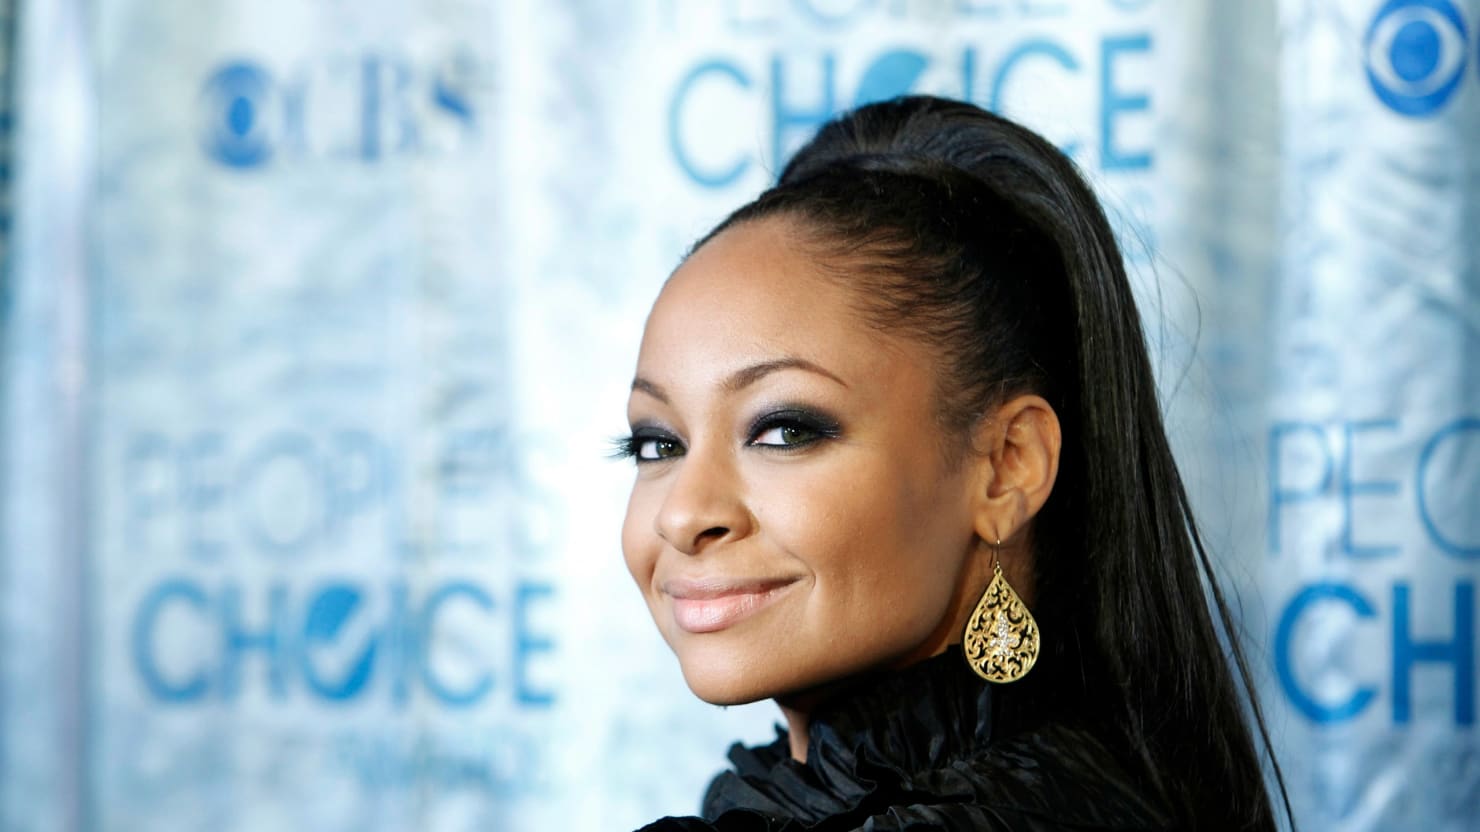 Raven-Symoné Leaves 'The View' to Reboot Hit Disney Comedy.